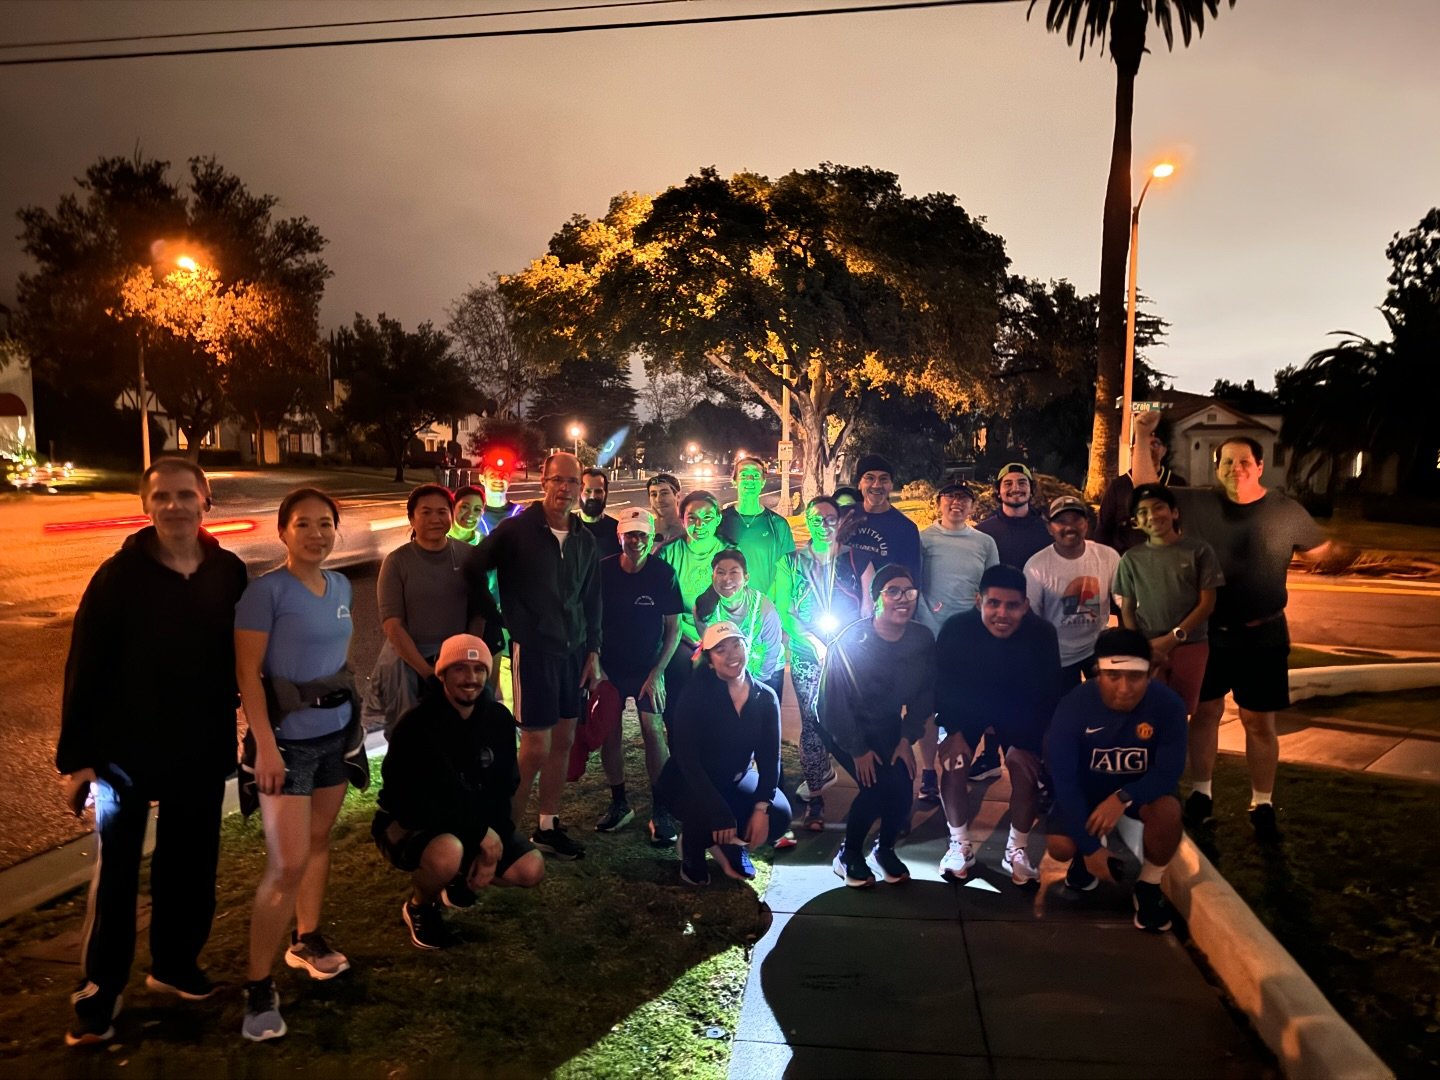 Monday Fun Run | This week is going to be up and down with weather but today is looking like a perfect day for kicking off your week with a run! Join us tonight at 6pm for our weekly 4 and 6 miler along with a walking group 

Here are the run details